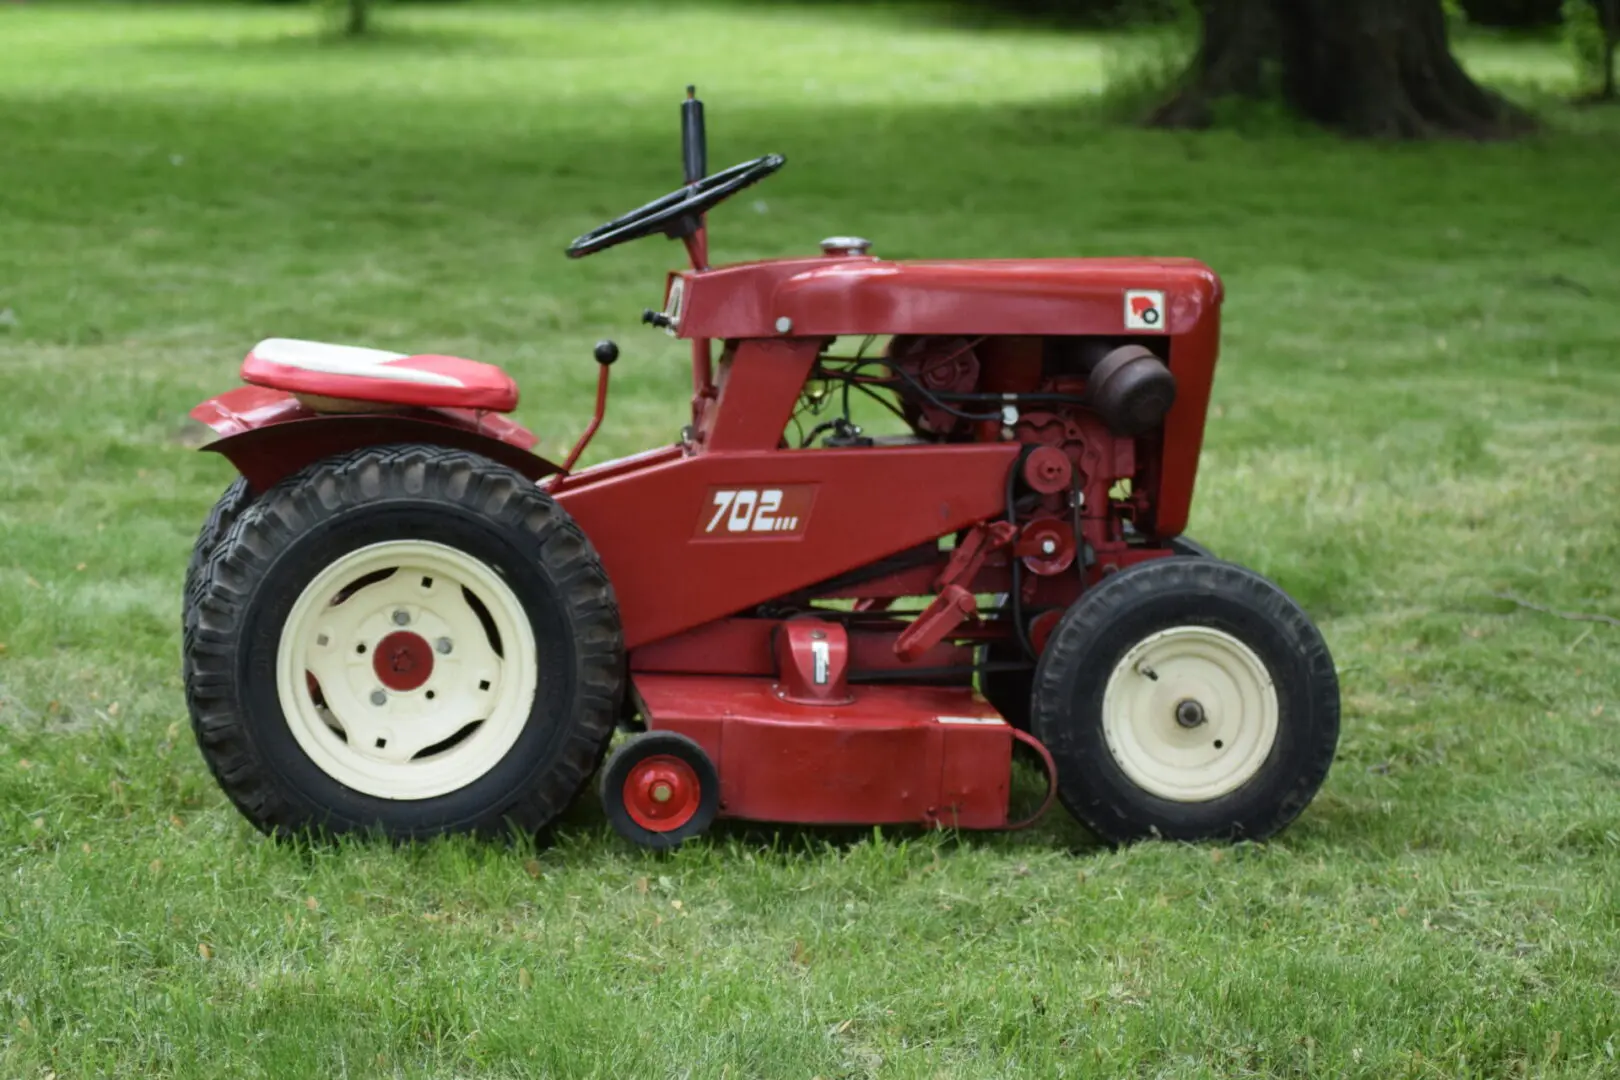 A red tractor sitting in the grass next to some trees.